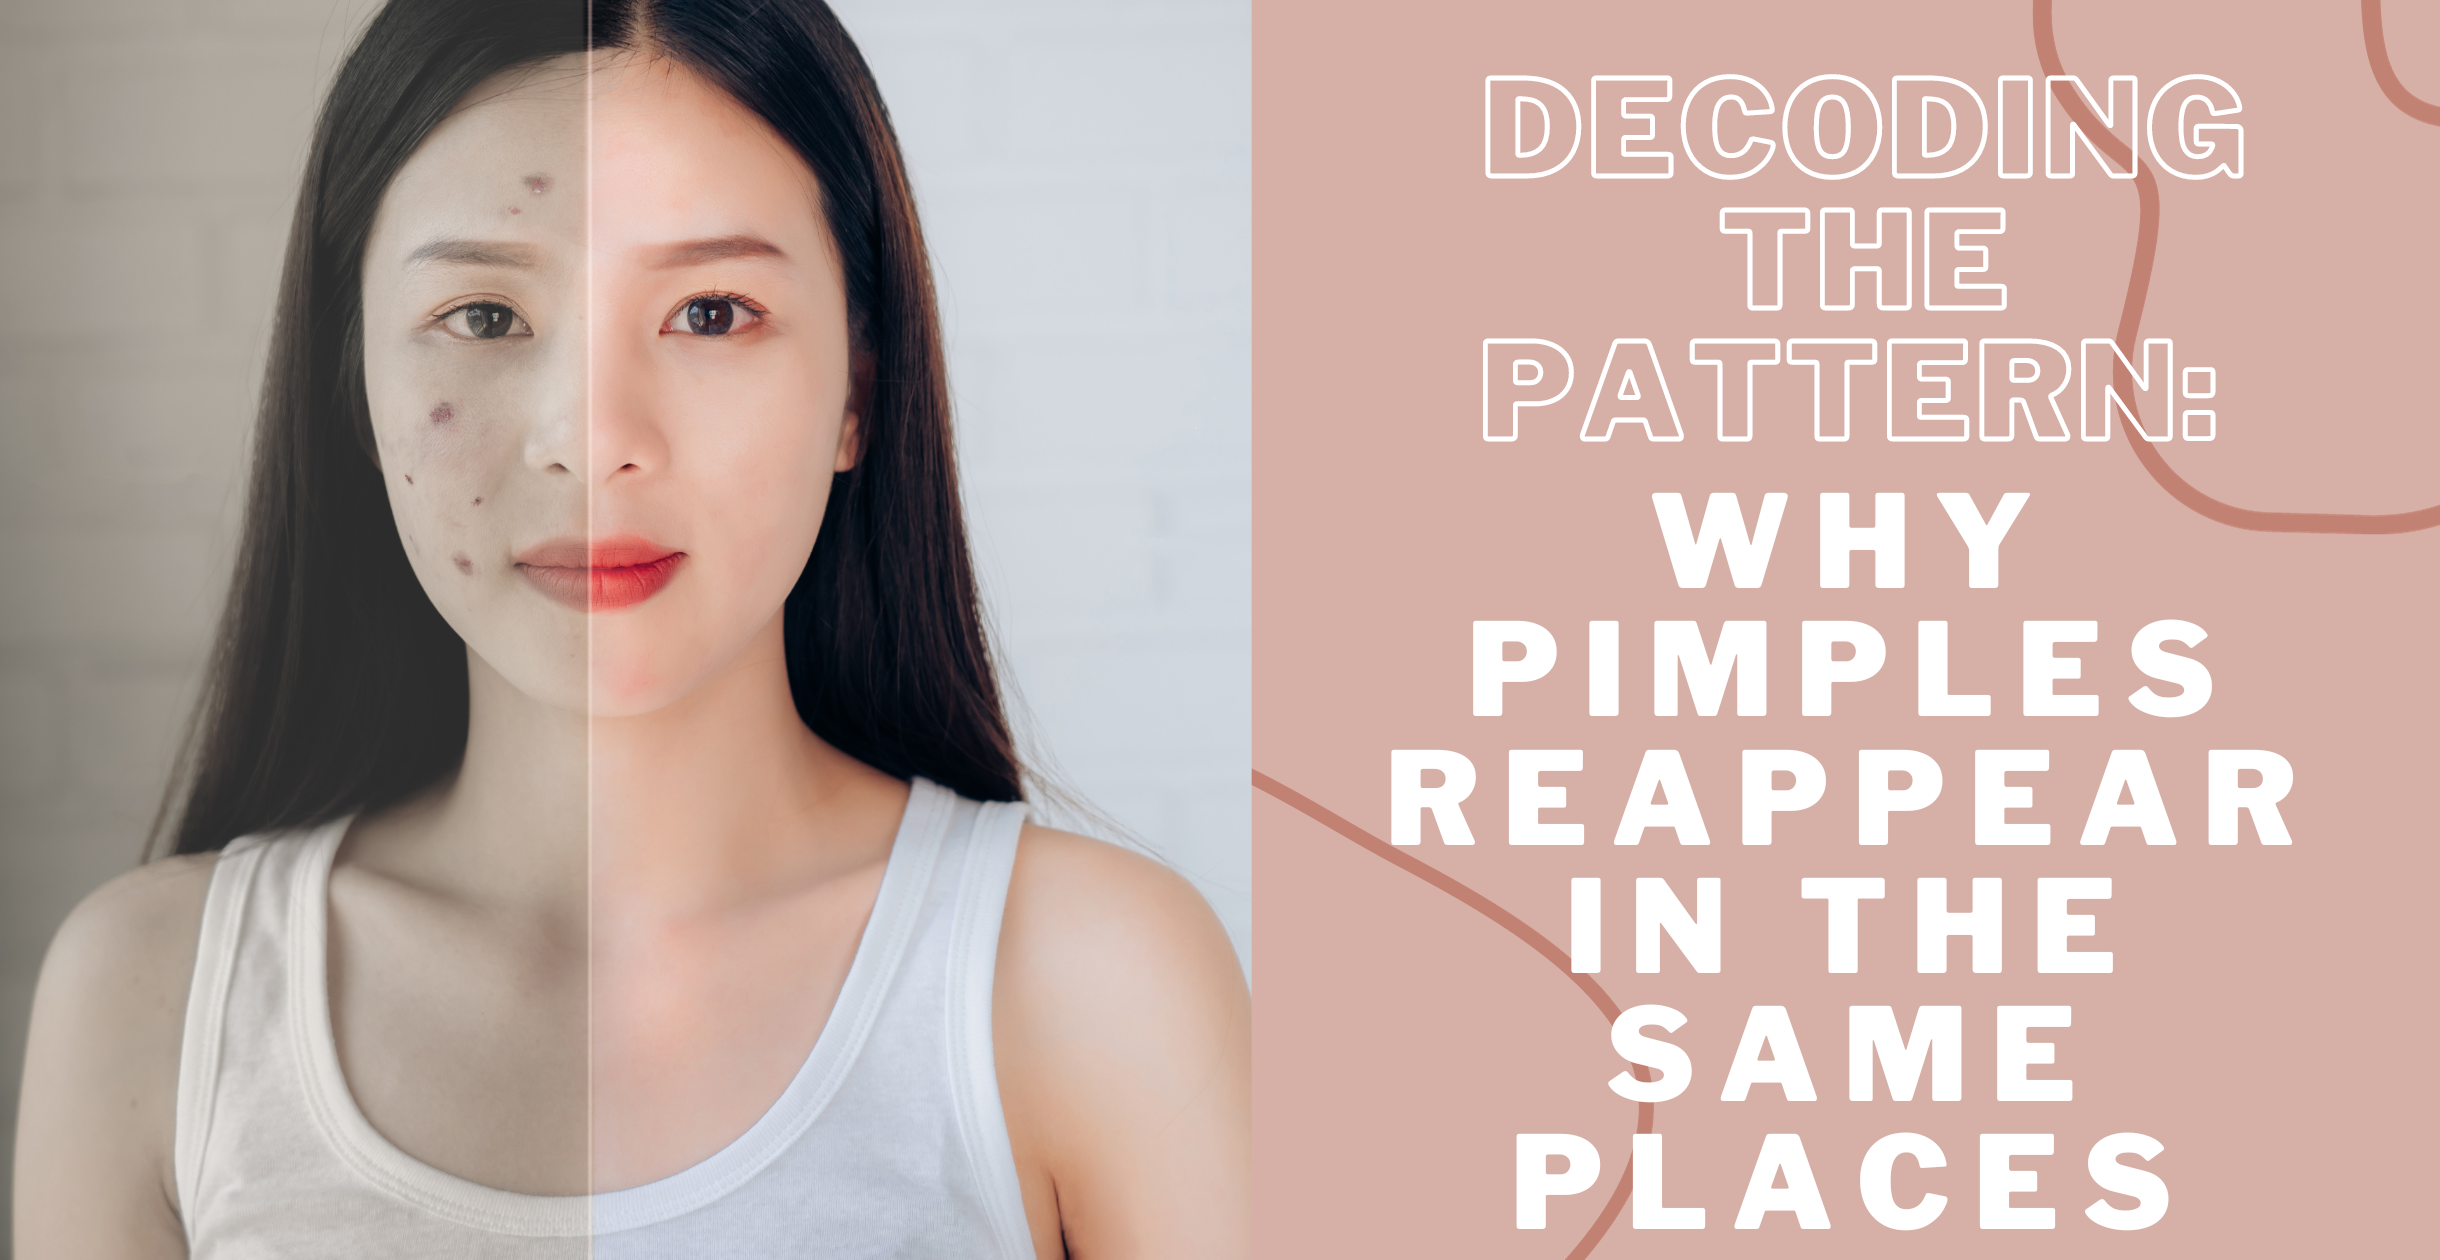 Decoding the Pattern: Why Pimples Reappear in the Same Places